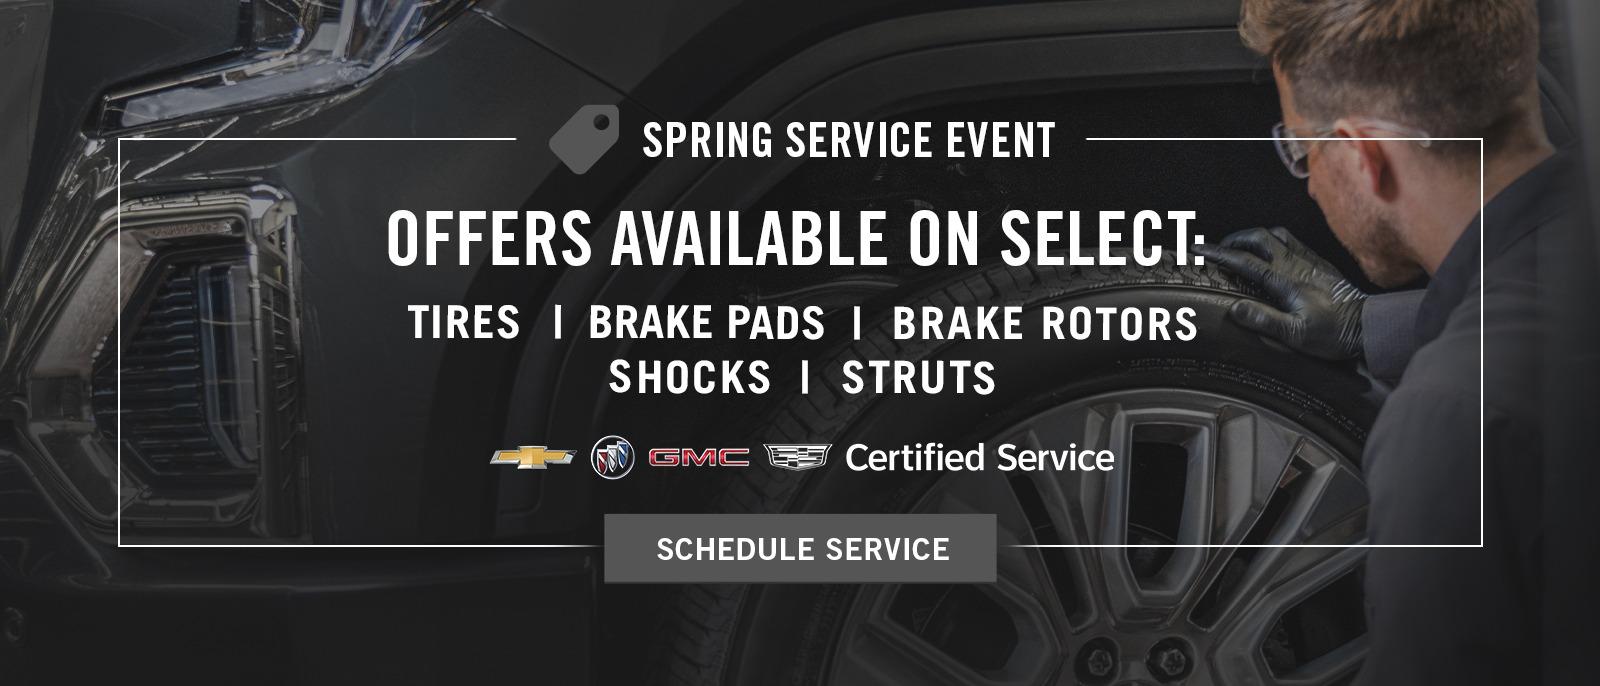 SPRING SERVICE EVENT - OFFERS AVAILABLE ON SELECT: TIRES | BRAKE PADS | BRAKE ROTORS | SHOCKS | STRUTS